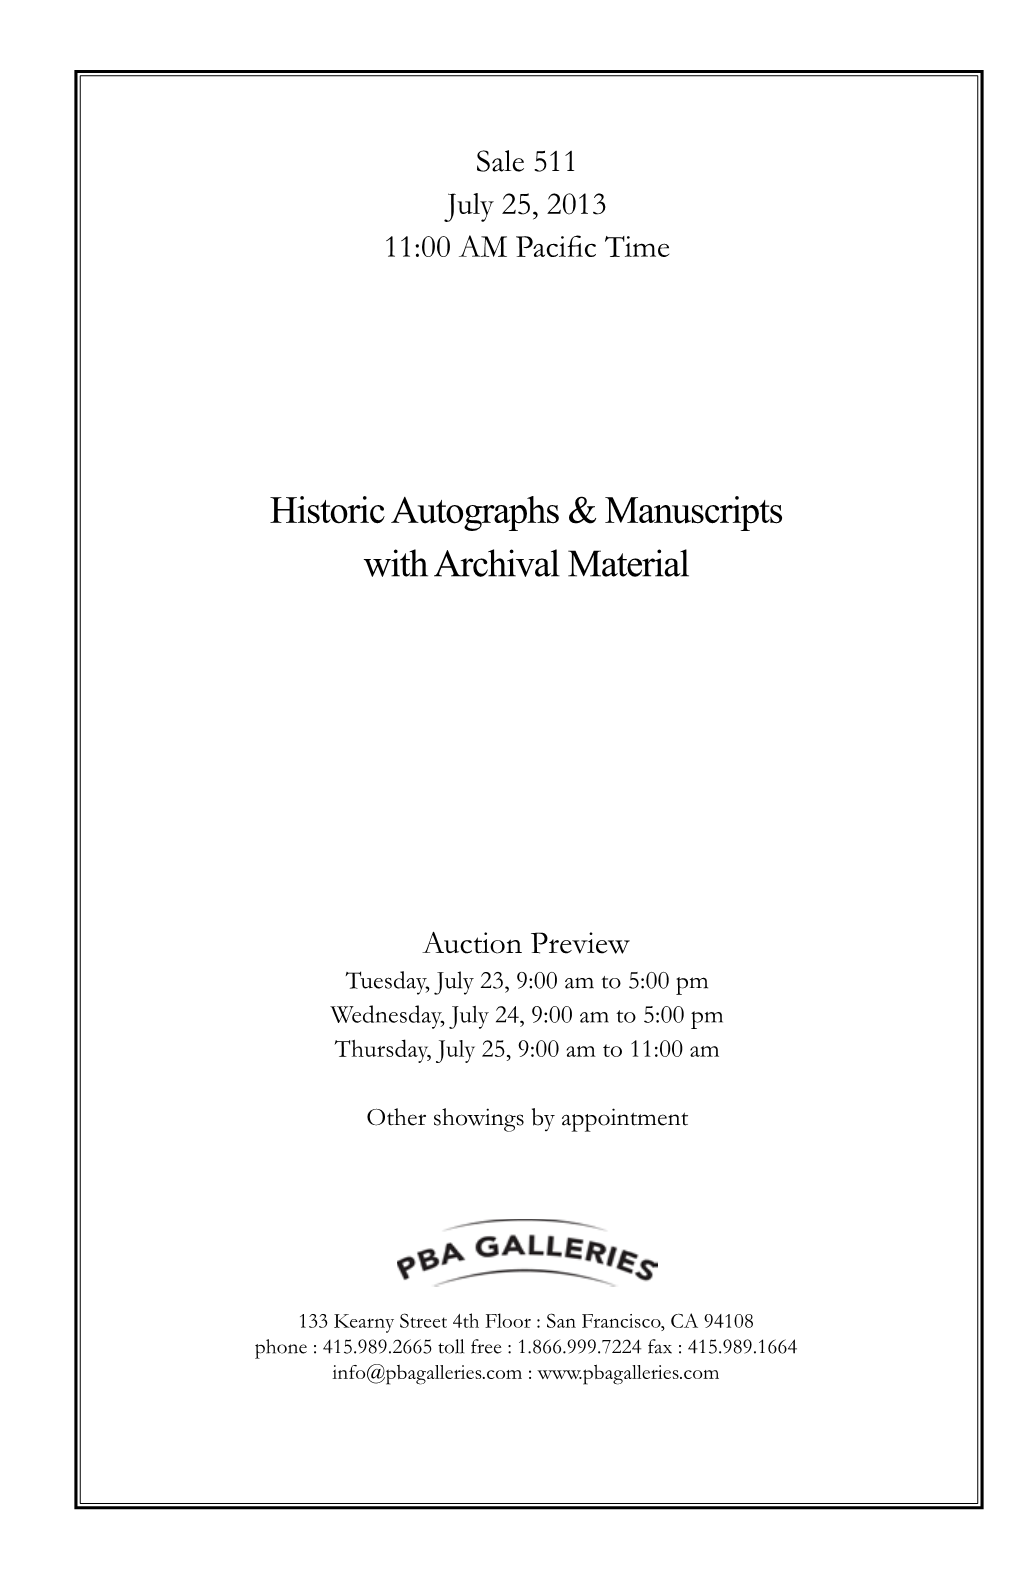 Historic Autographs & Manuscripts with Archival Material